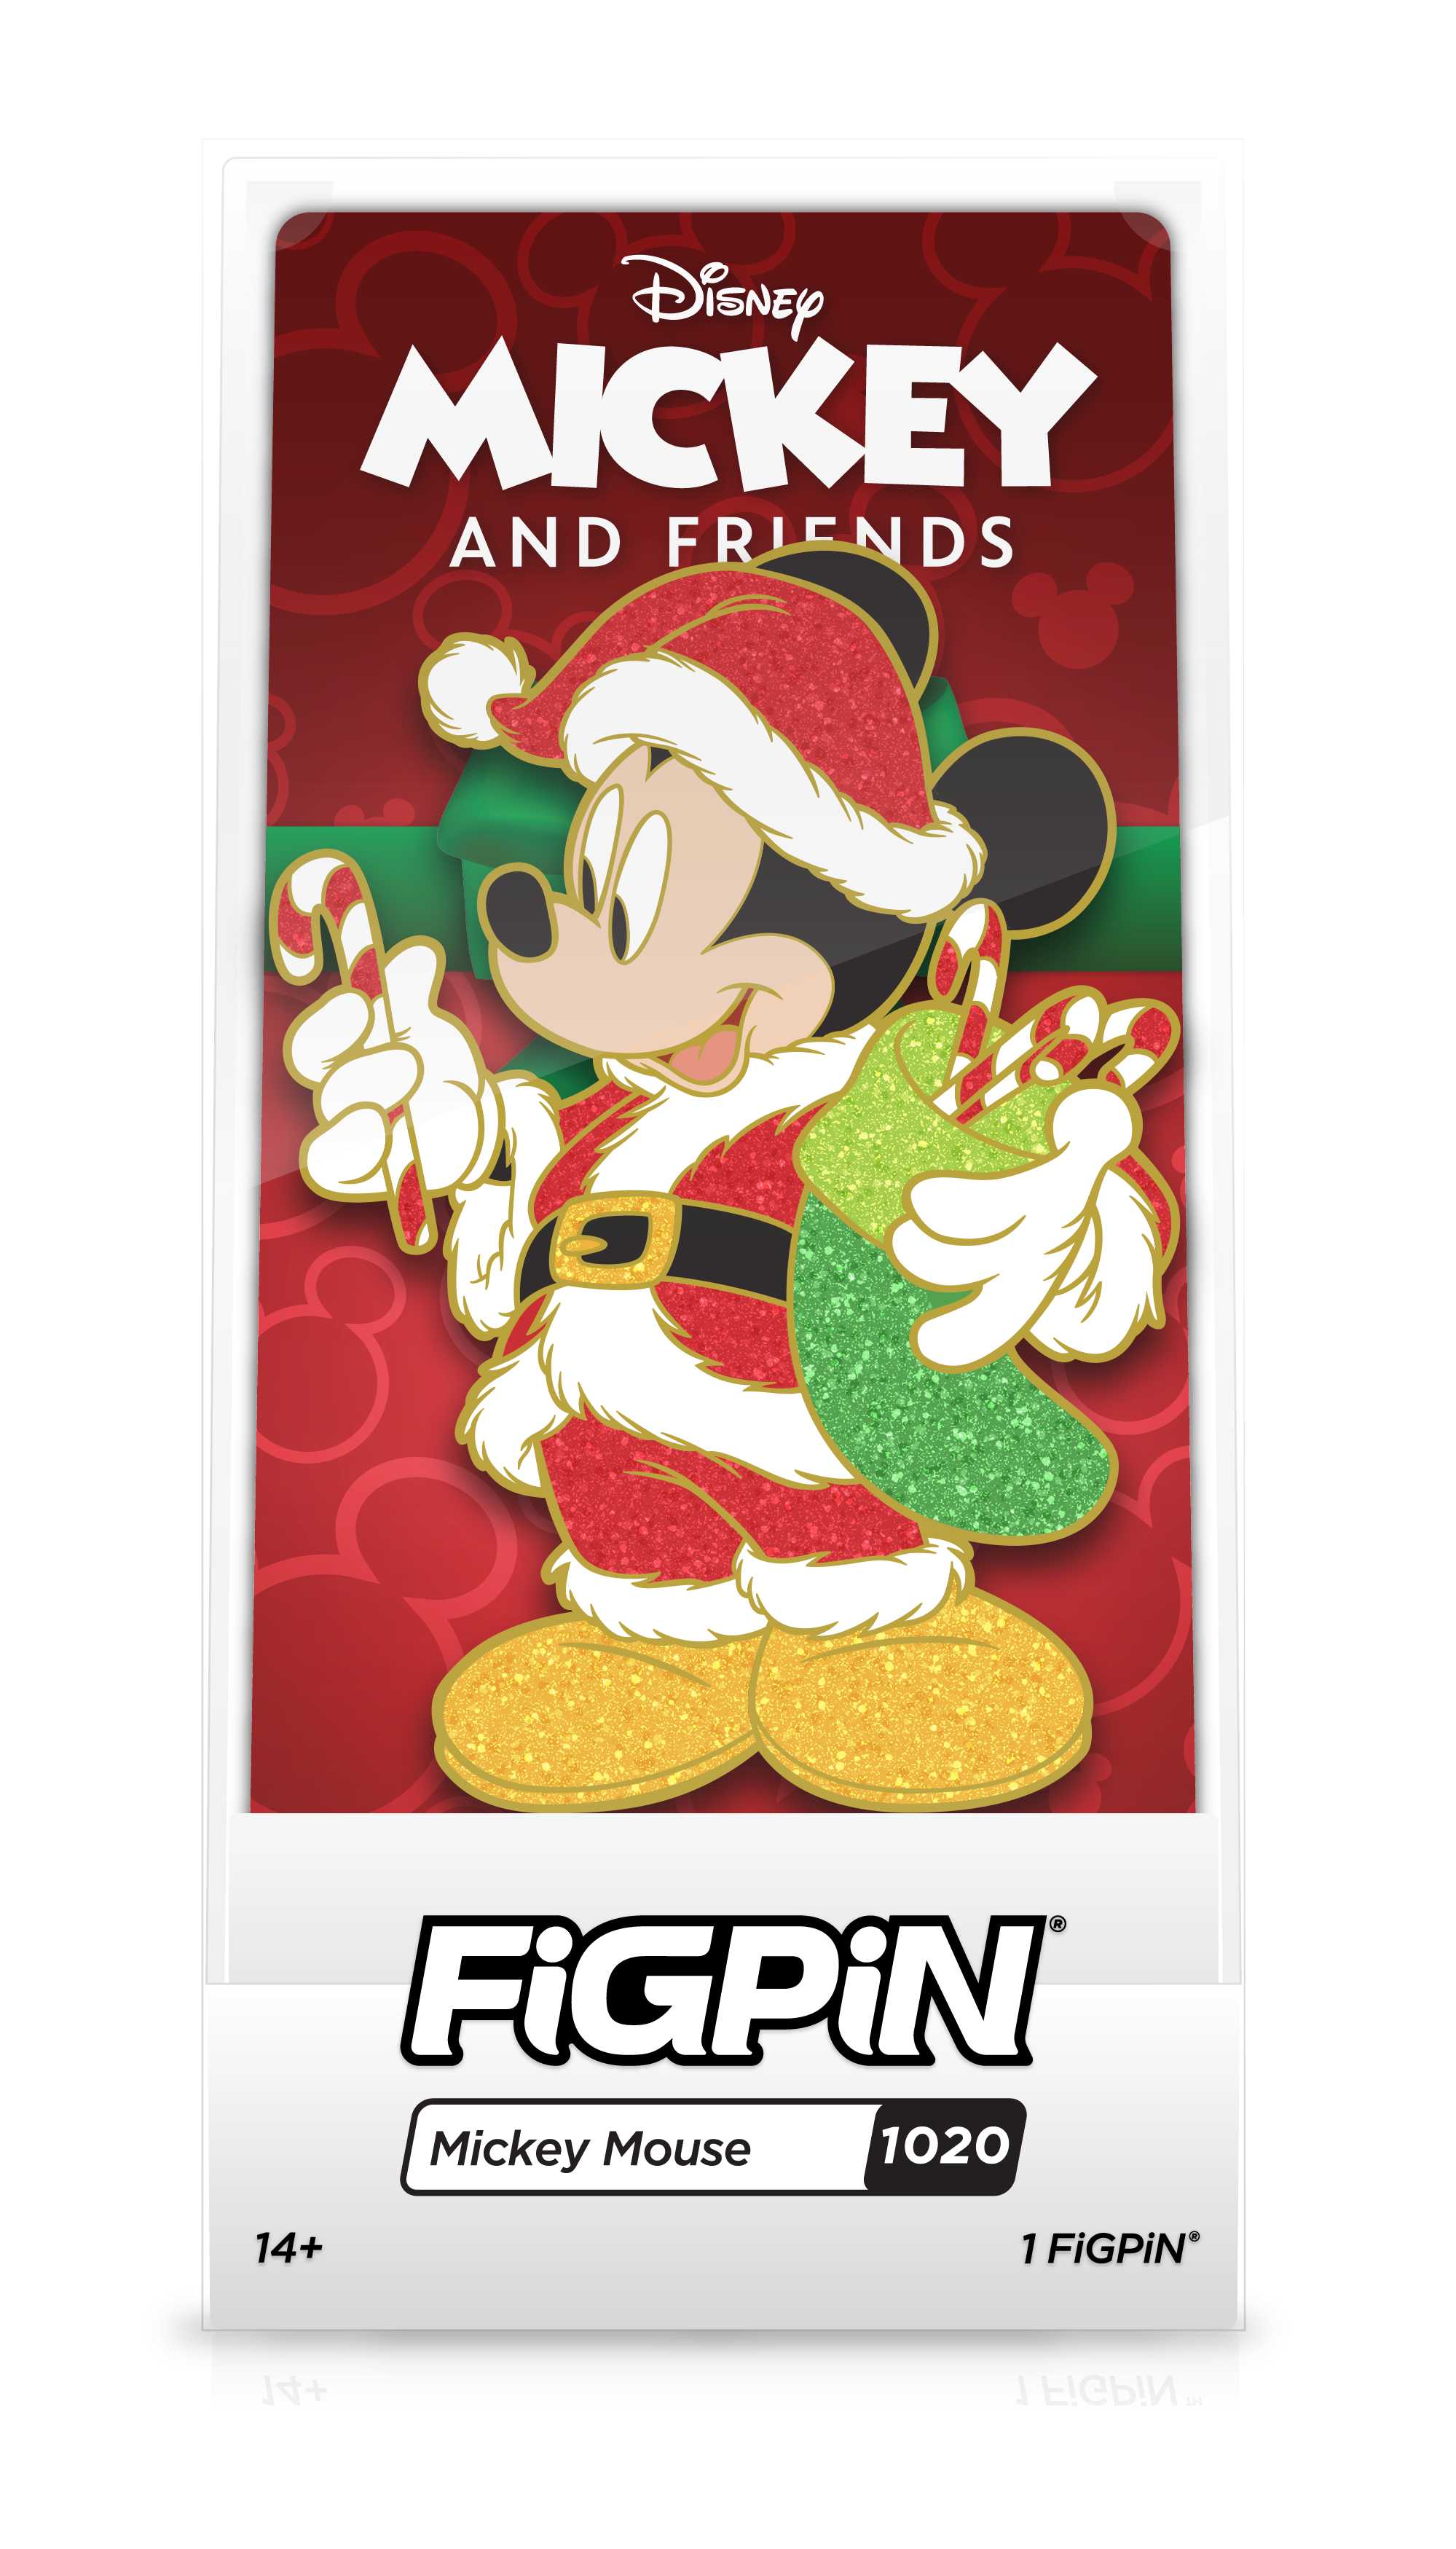 Front view of Disney's Mickey Mouse enamel pin inside FiGPiN Display case reading “FiGPiN - Mickey Mouse (1020)”